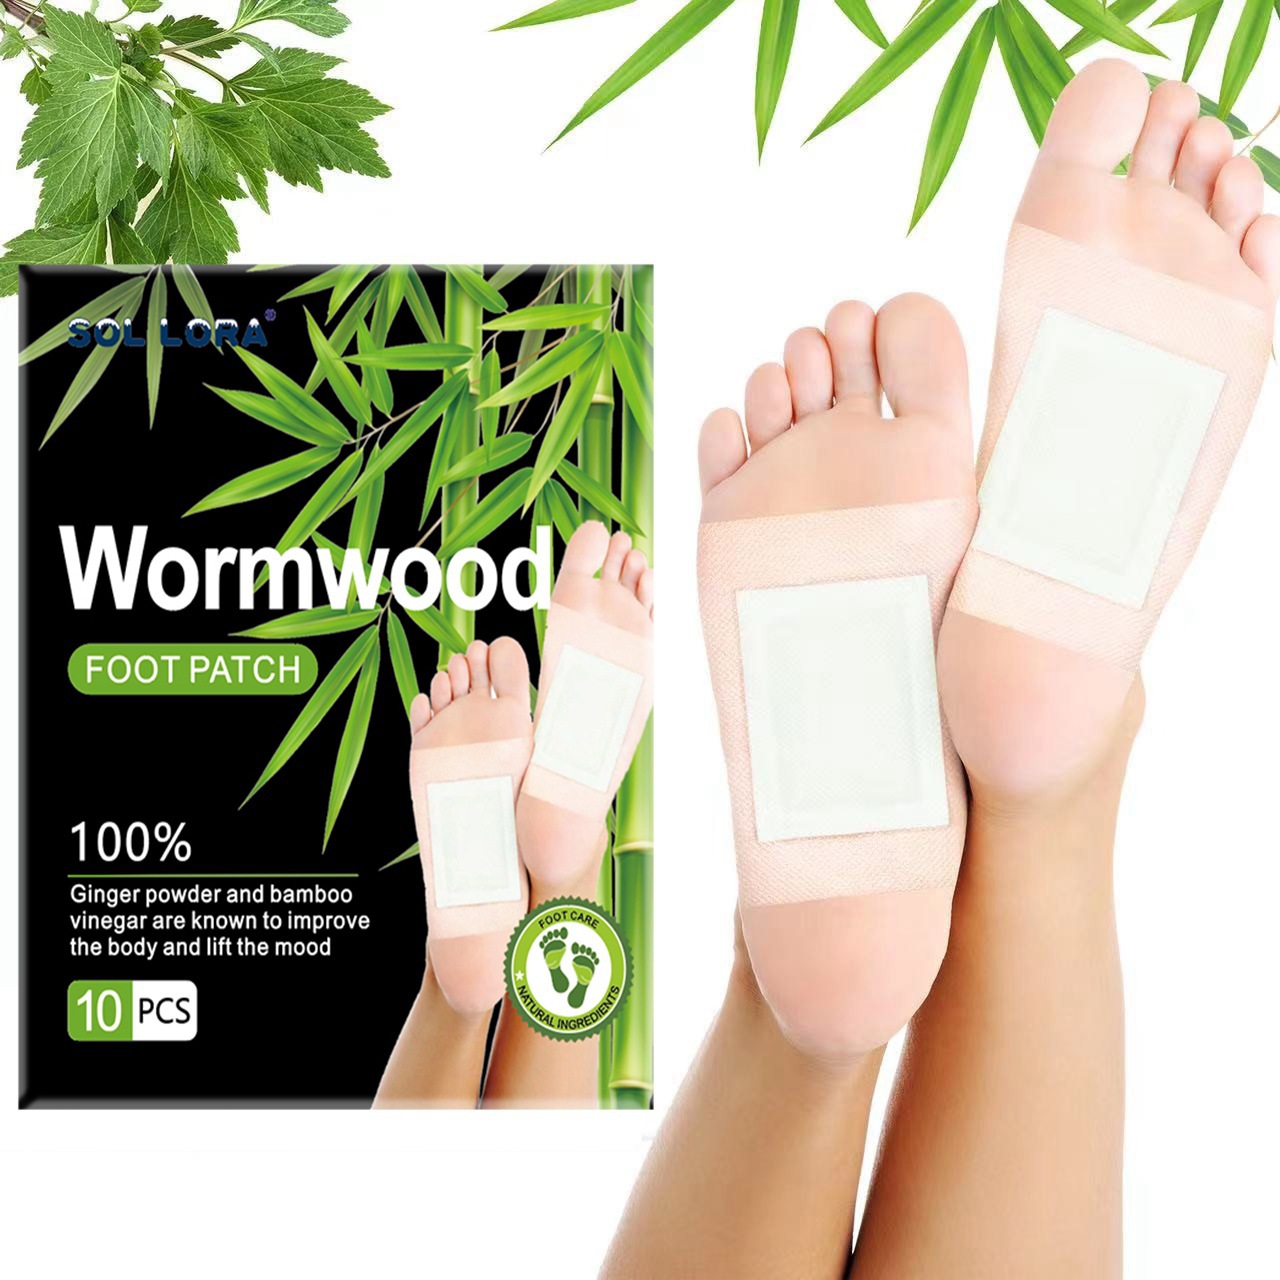 Wormwood Foot Patch, Sleep Feel Better, Ginger Foot Pads for Relaxation, Relieve Stress and Pain